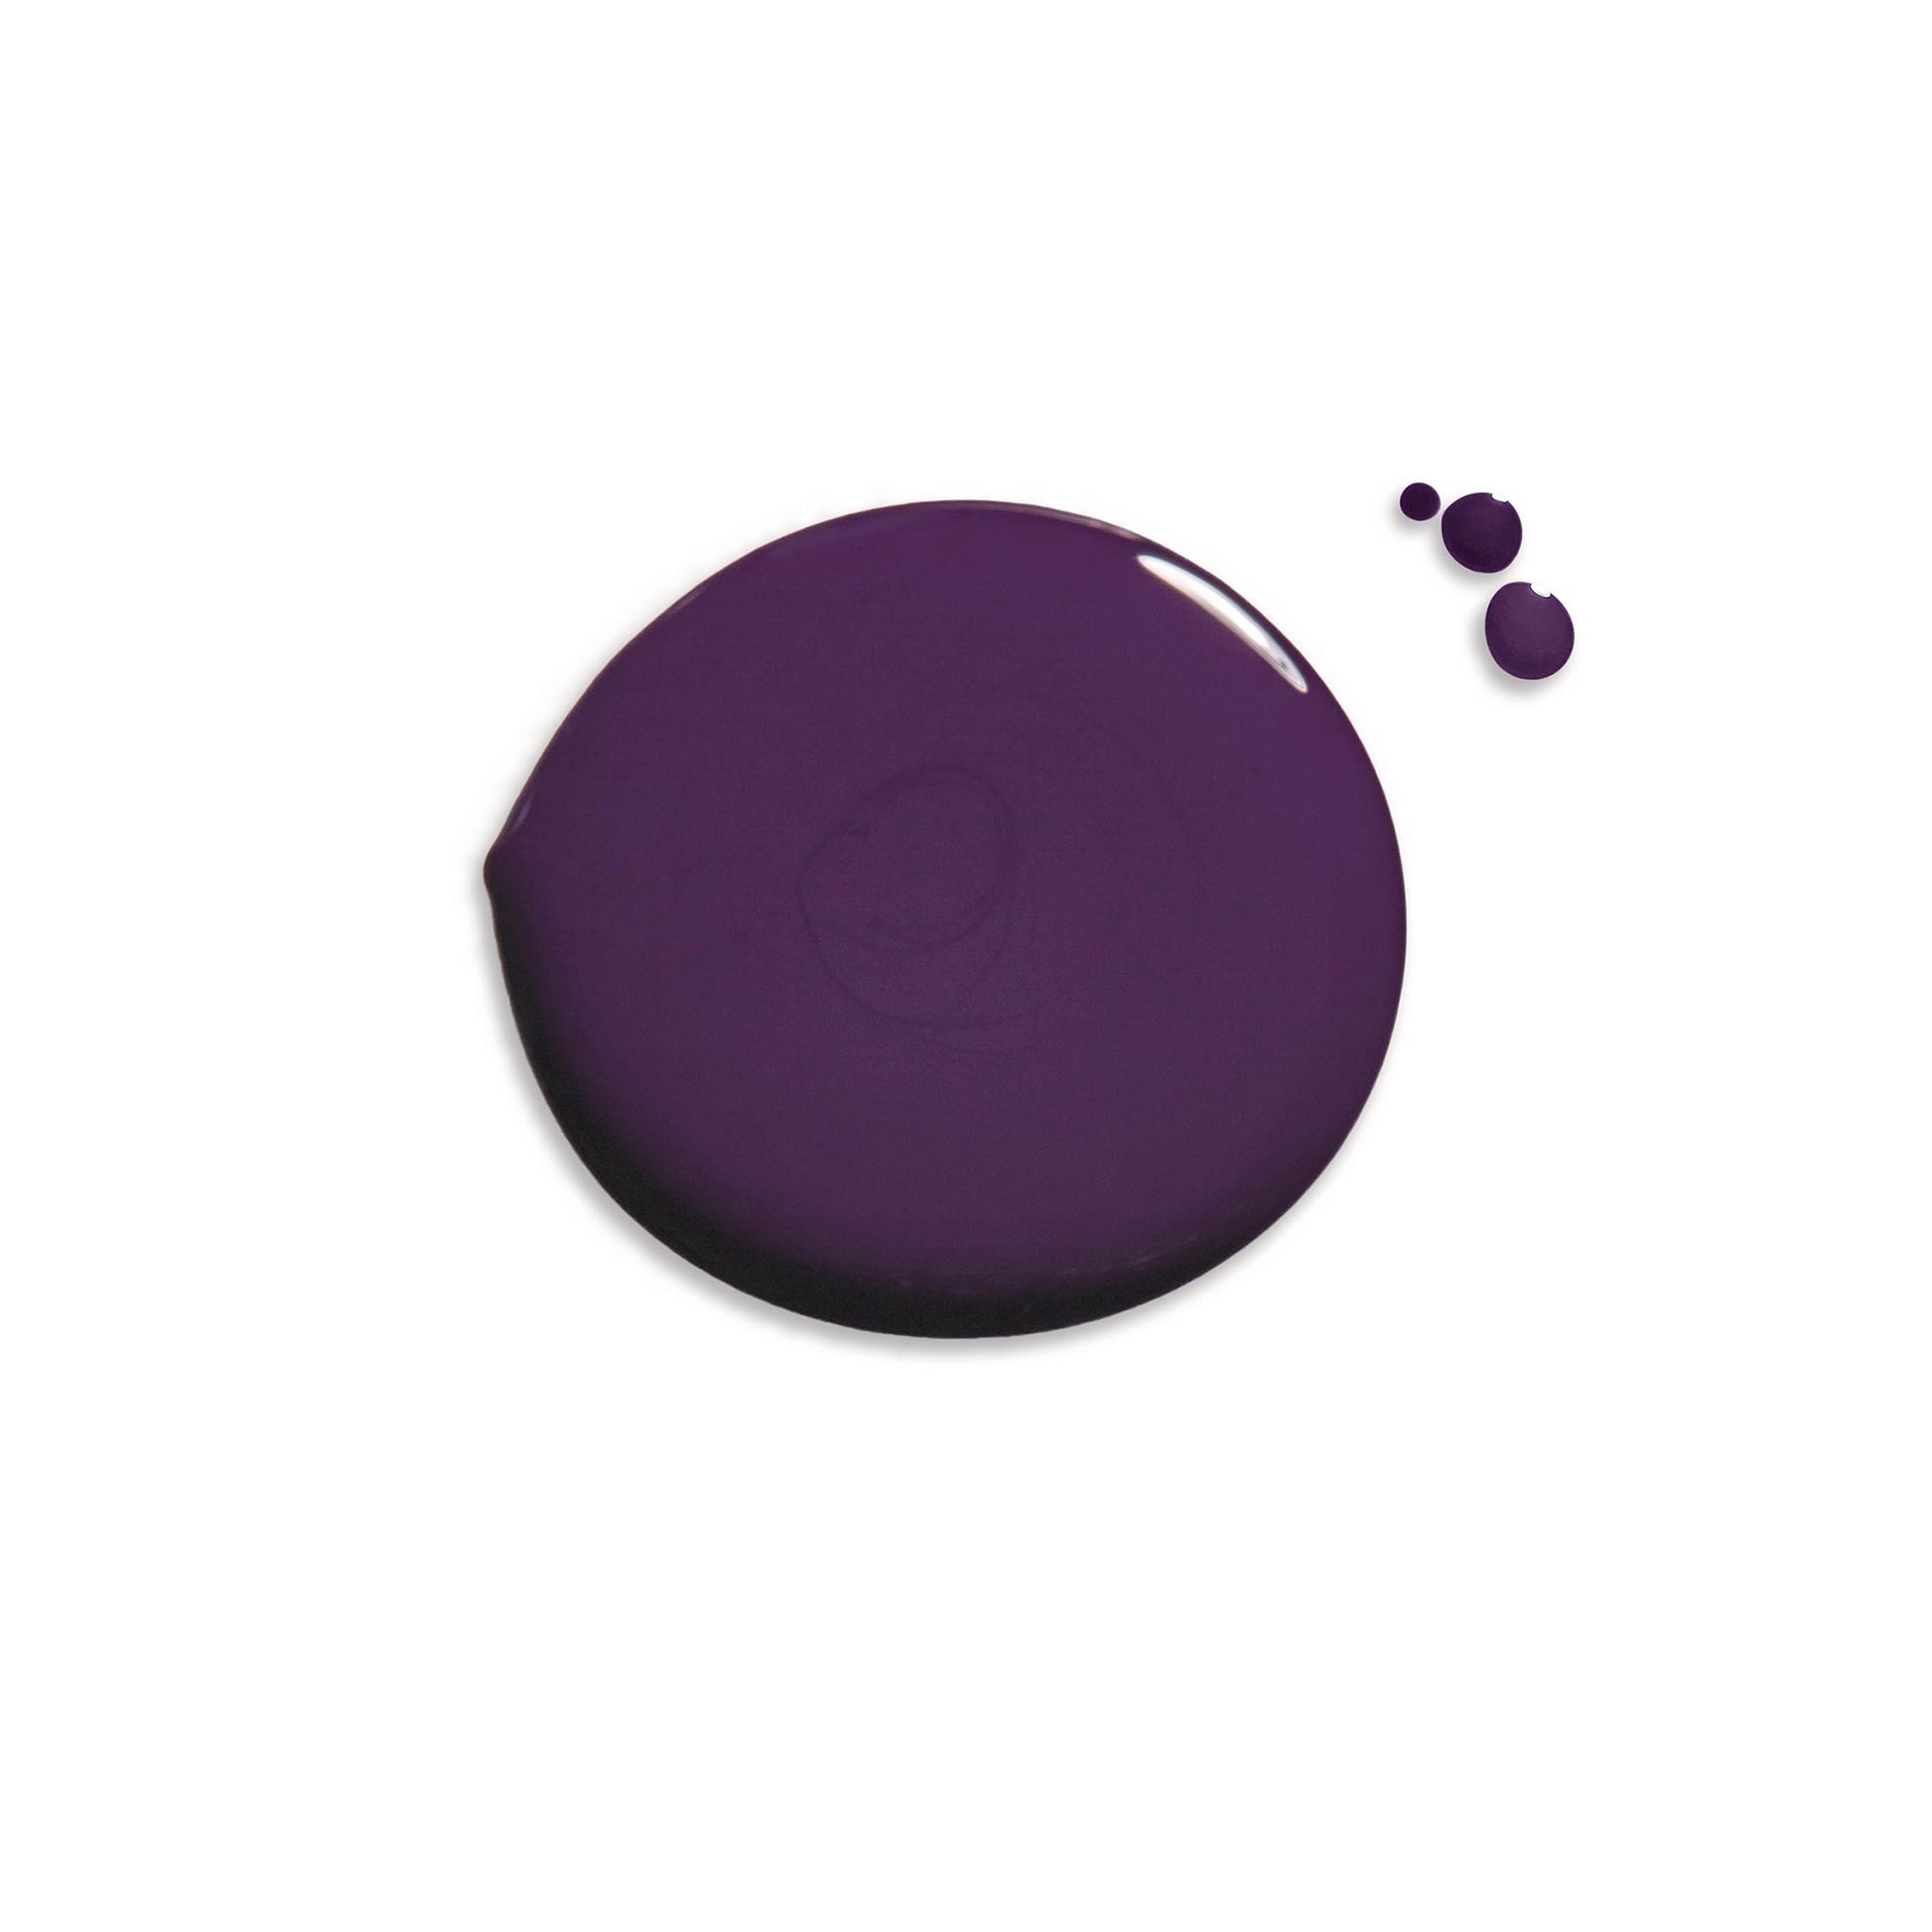 Swatch of the Emilie Heathe Nail Artist Nail Polish in Big Night Out, a rich purple shade.